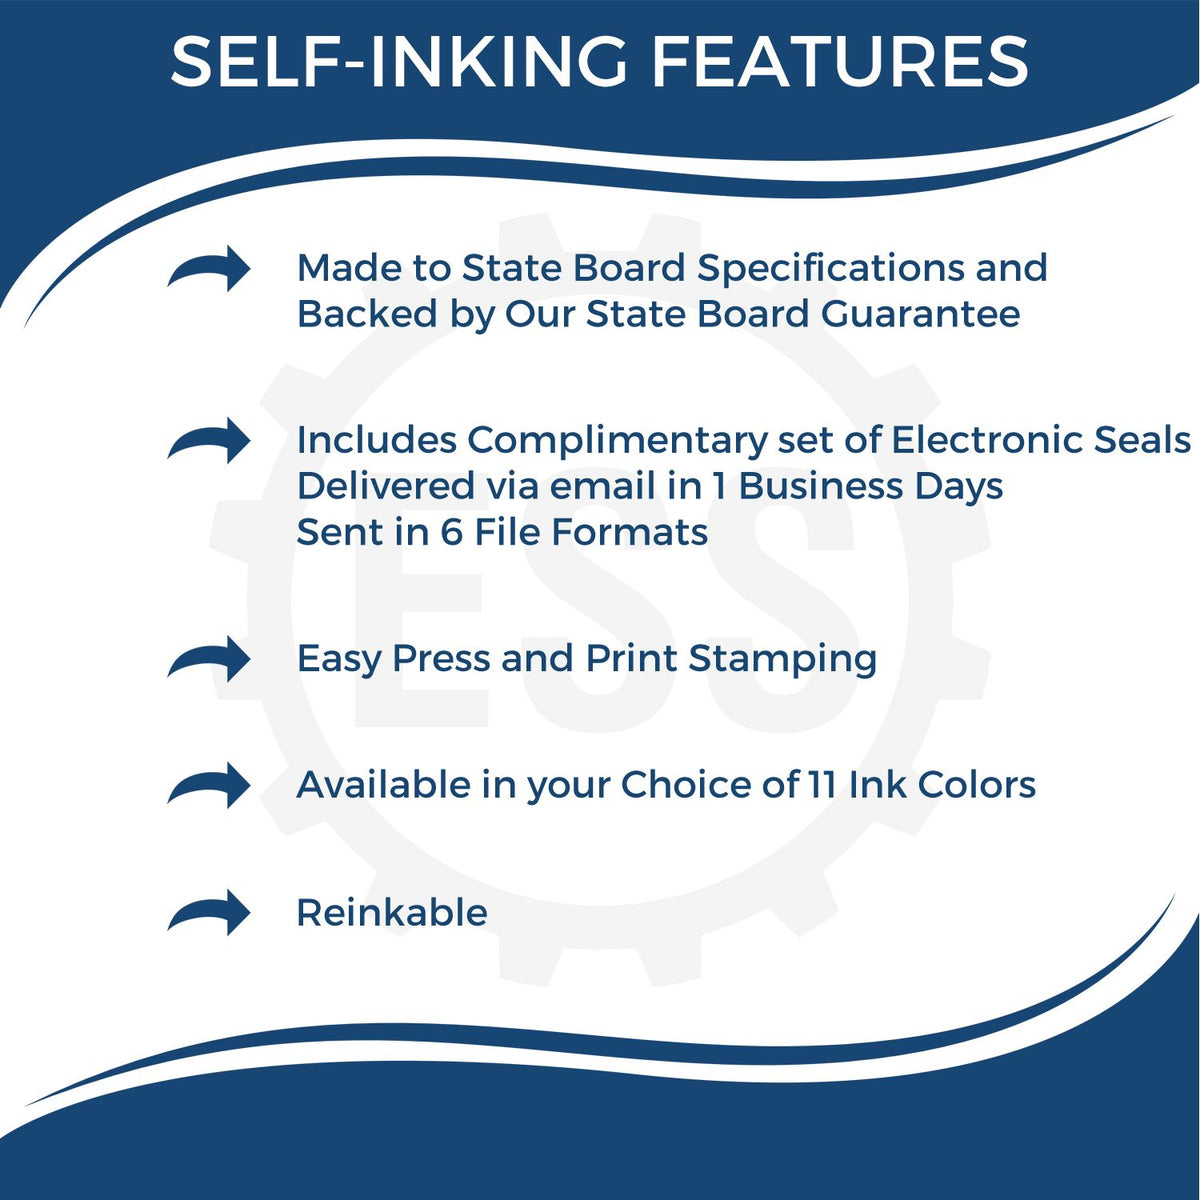 A picture of an infographic highlighting the selling points for the Self-Inking South Carolina Landscape Architect Stamp